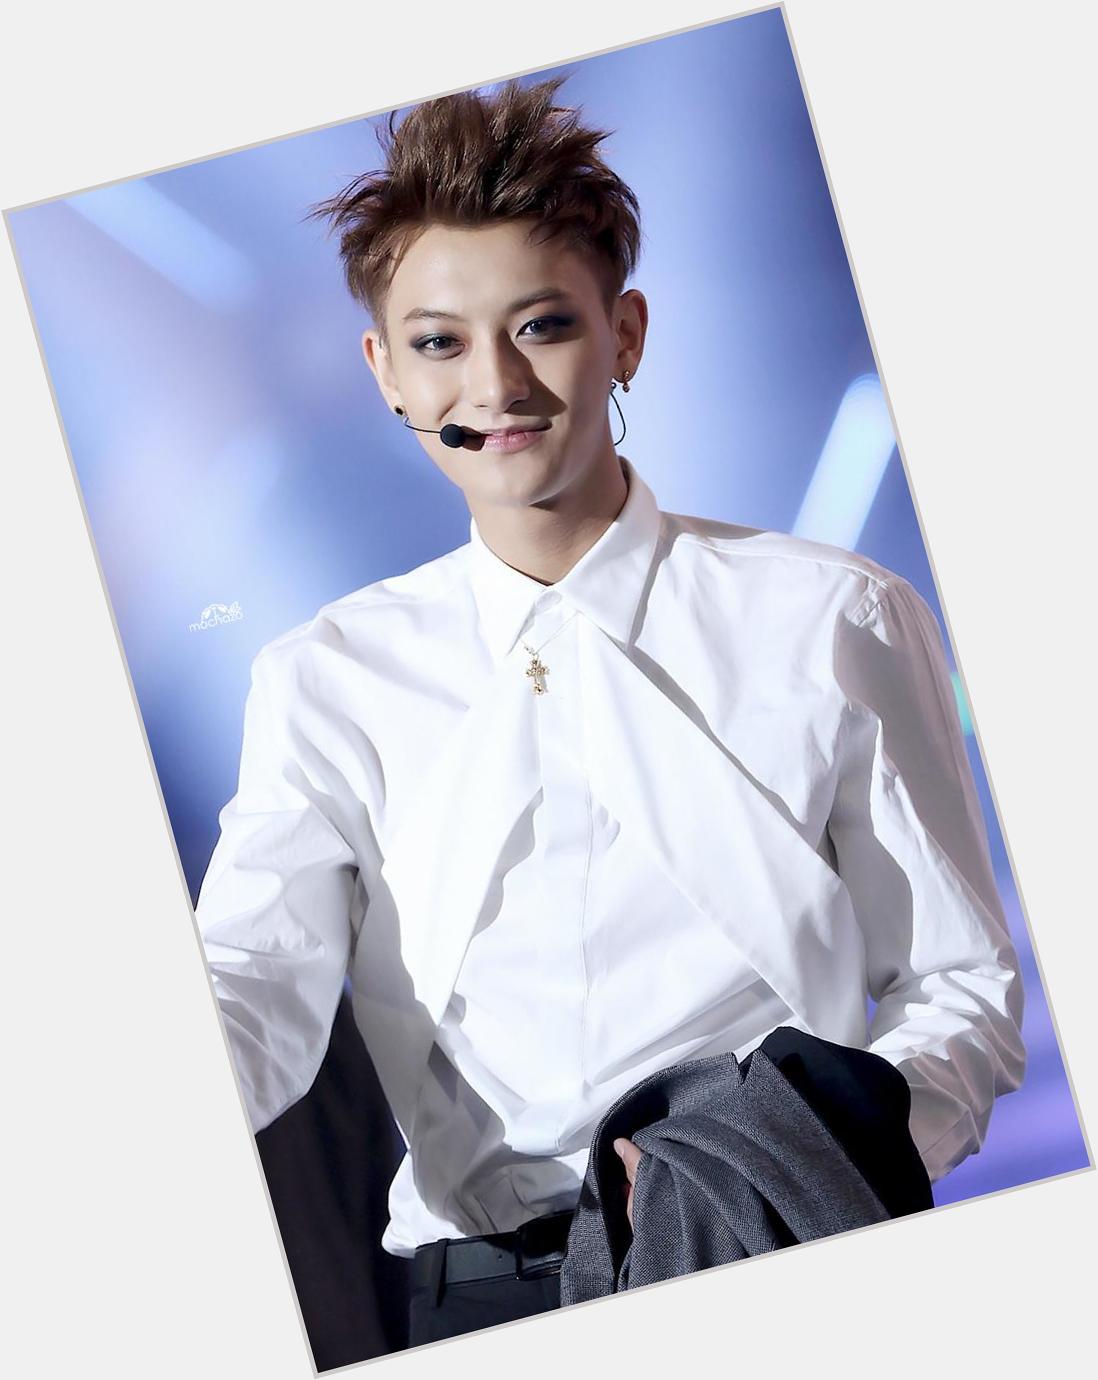 Happy Birthday Huang Zitao! Take care and Get well soon  